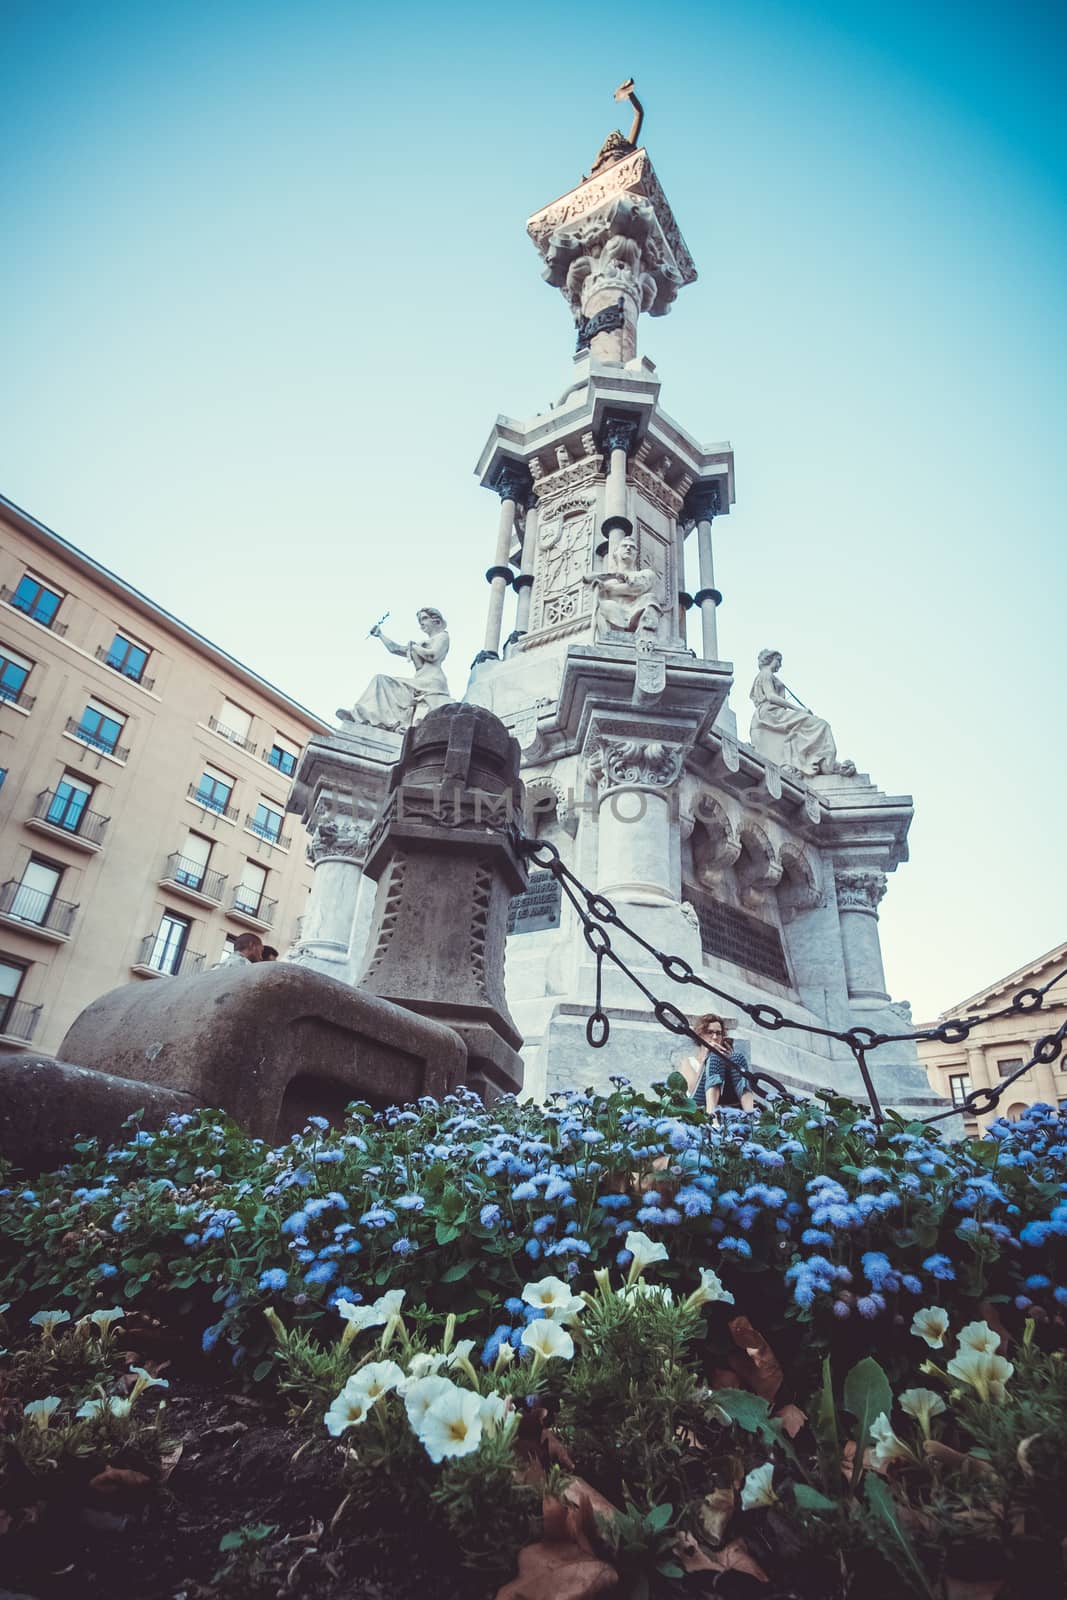 Los Fueros statue located in Sarasate boulevard in Pamplona, Spa by mikelju